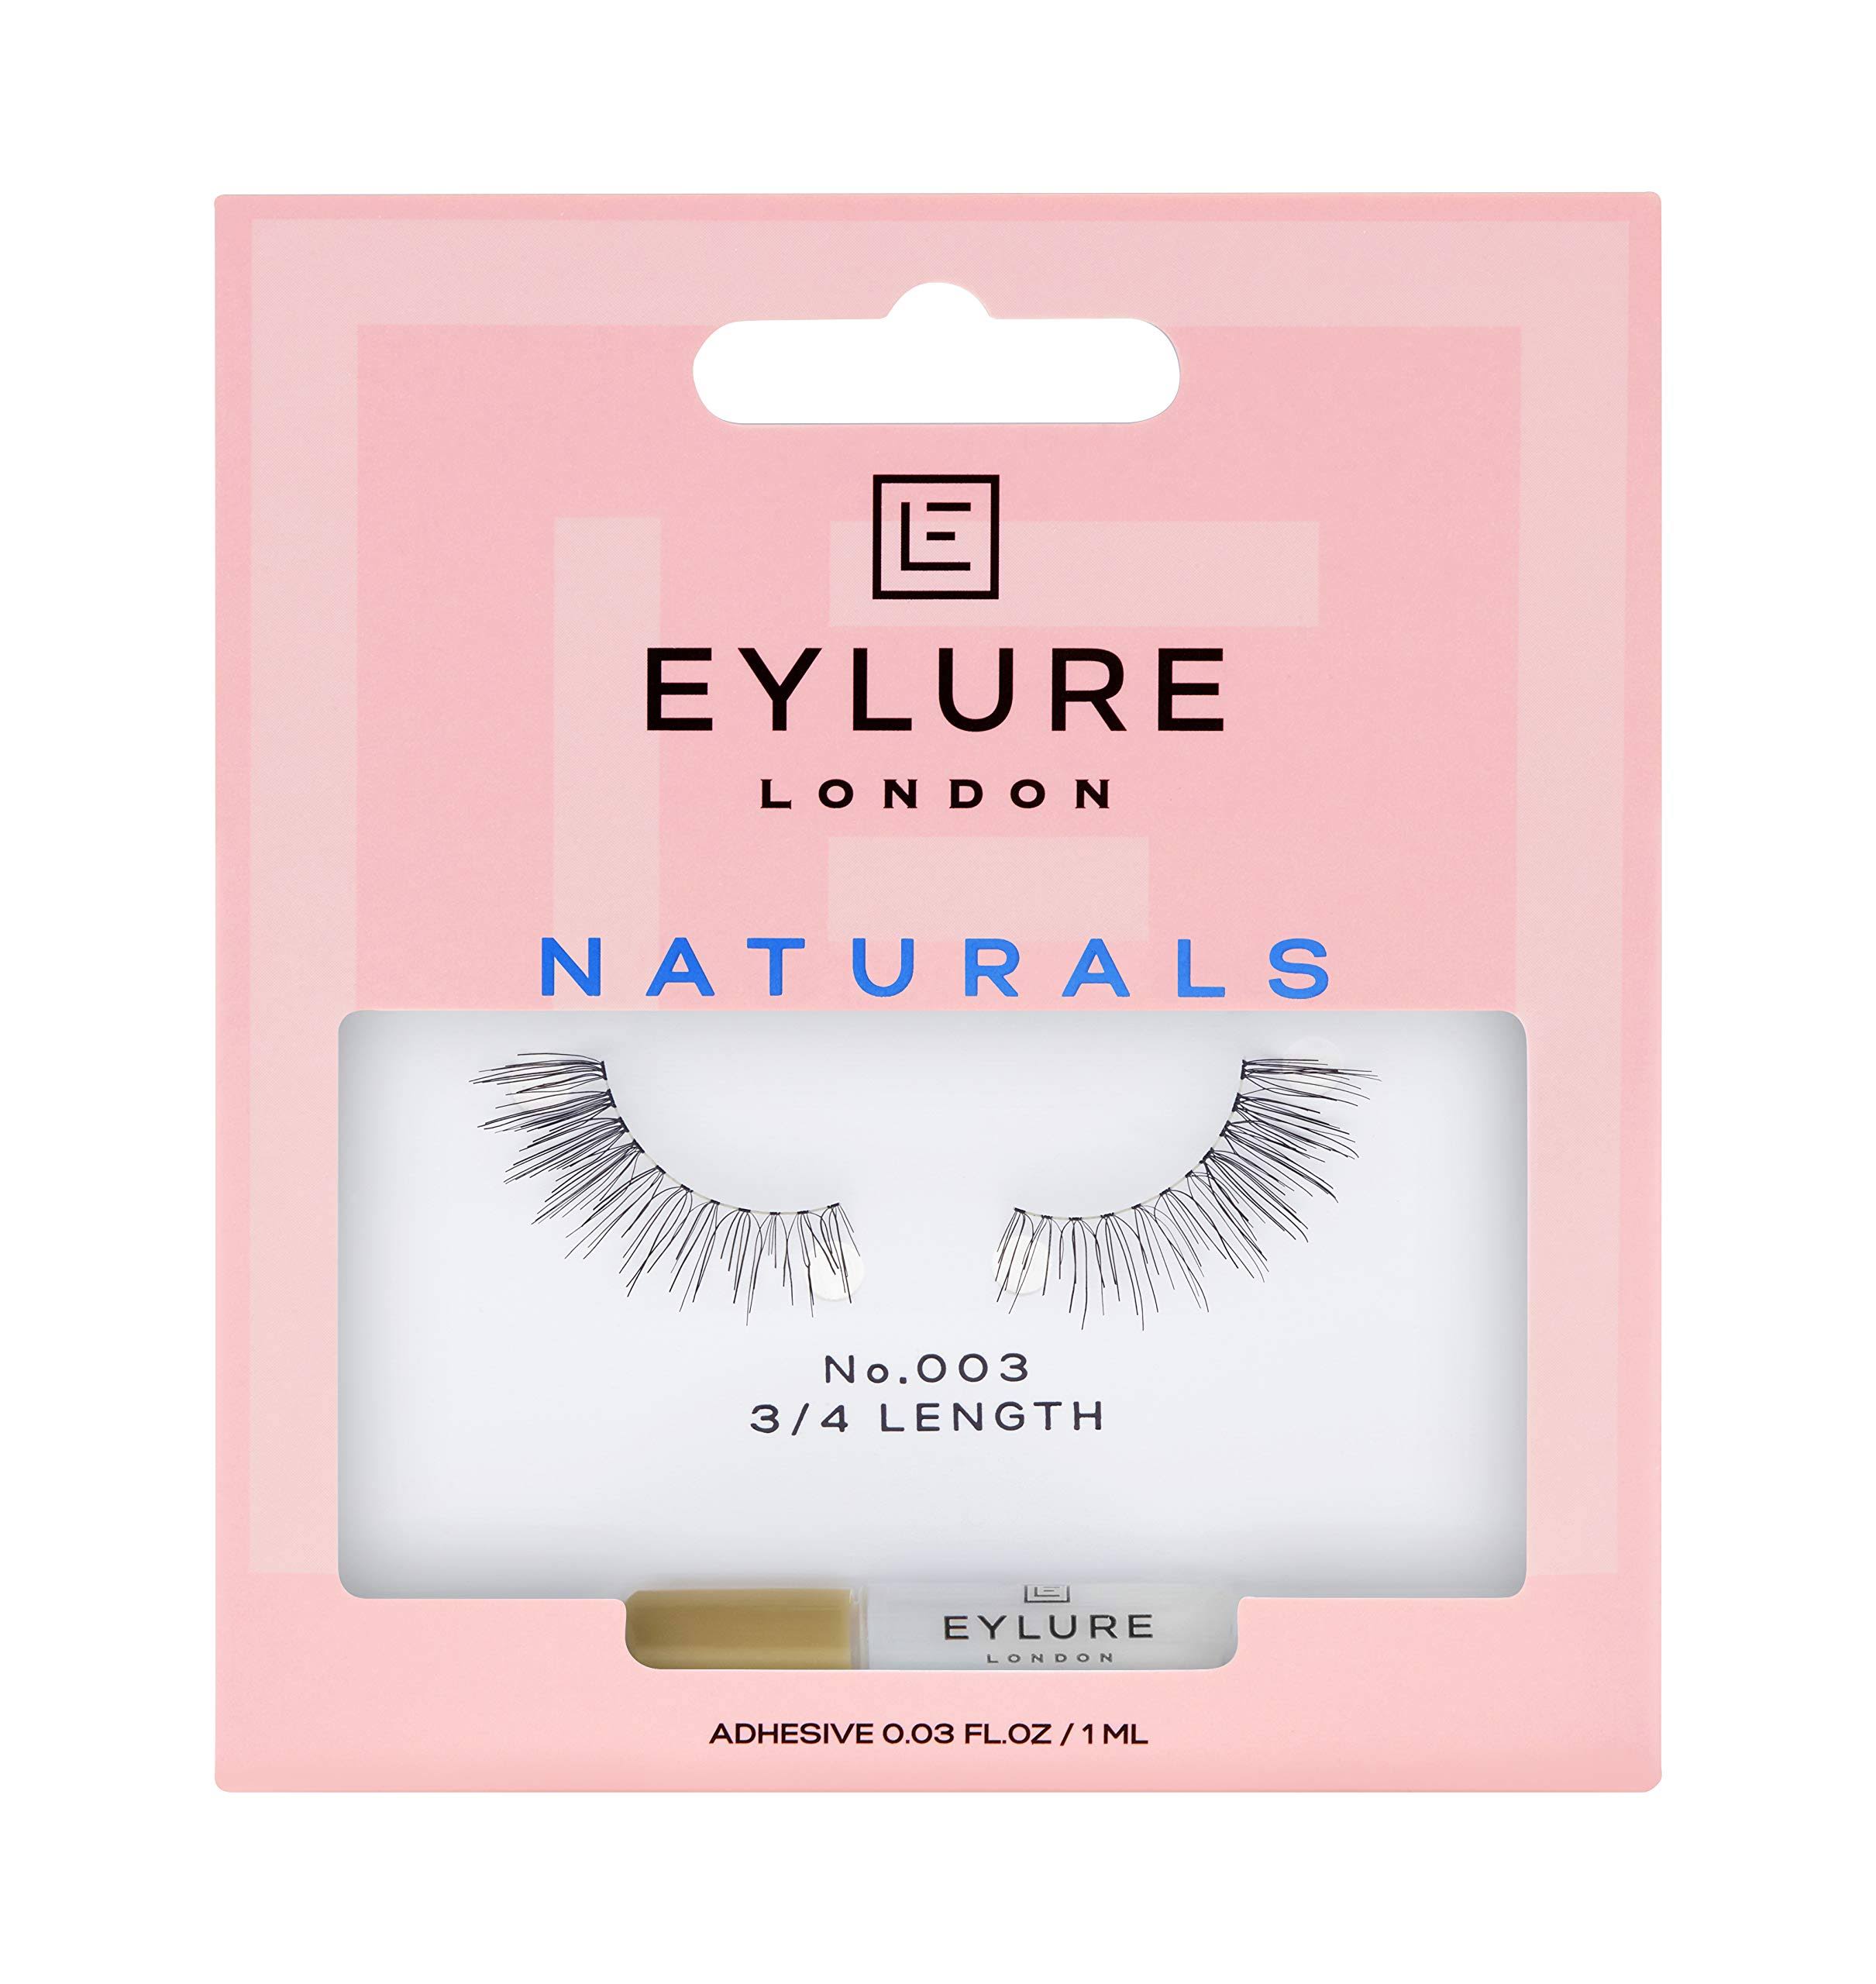 Eylure Natural Lashes - #003